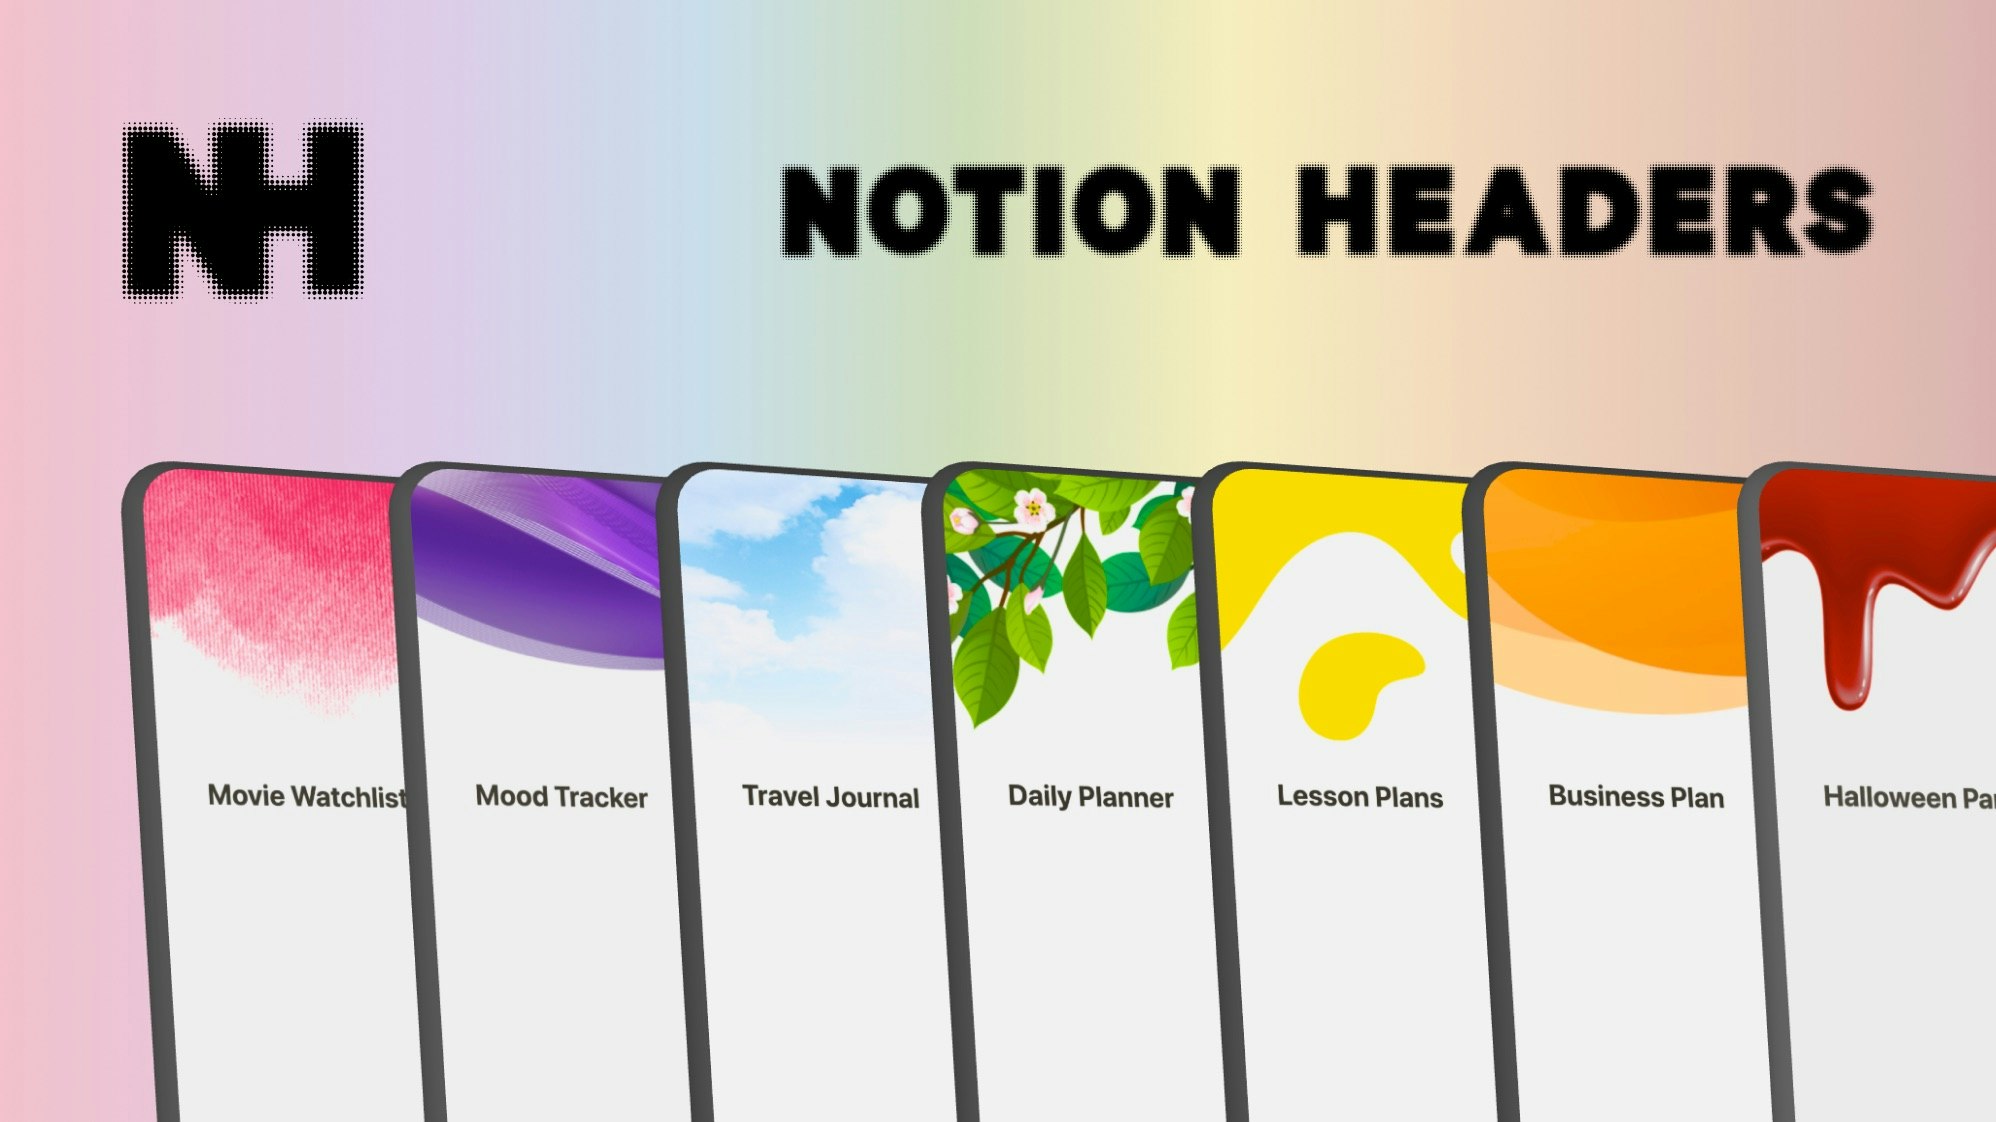 notion-headers-2 - Free gallery of high-quality Notion page covers